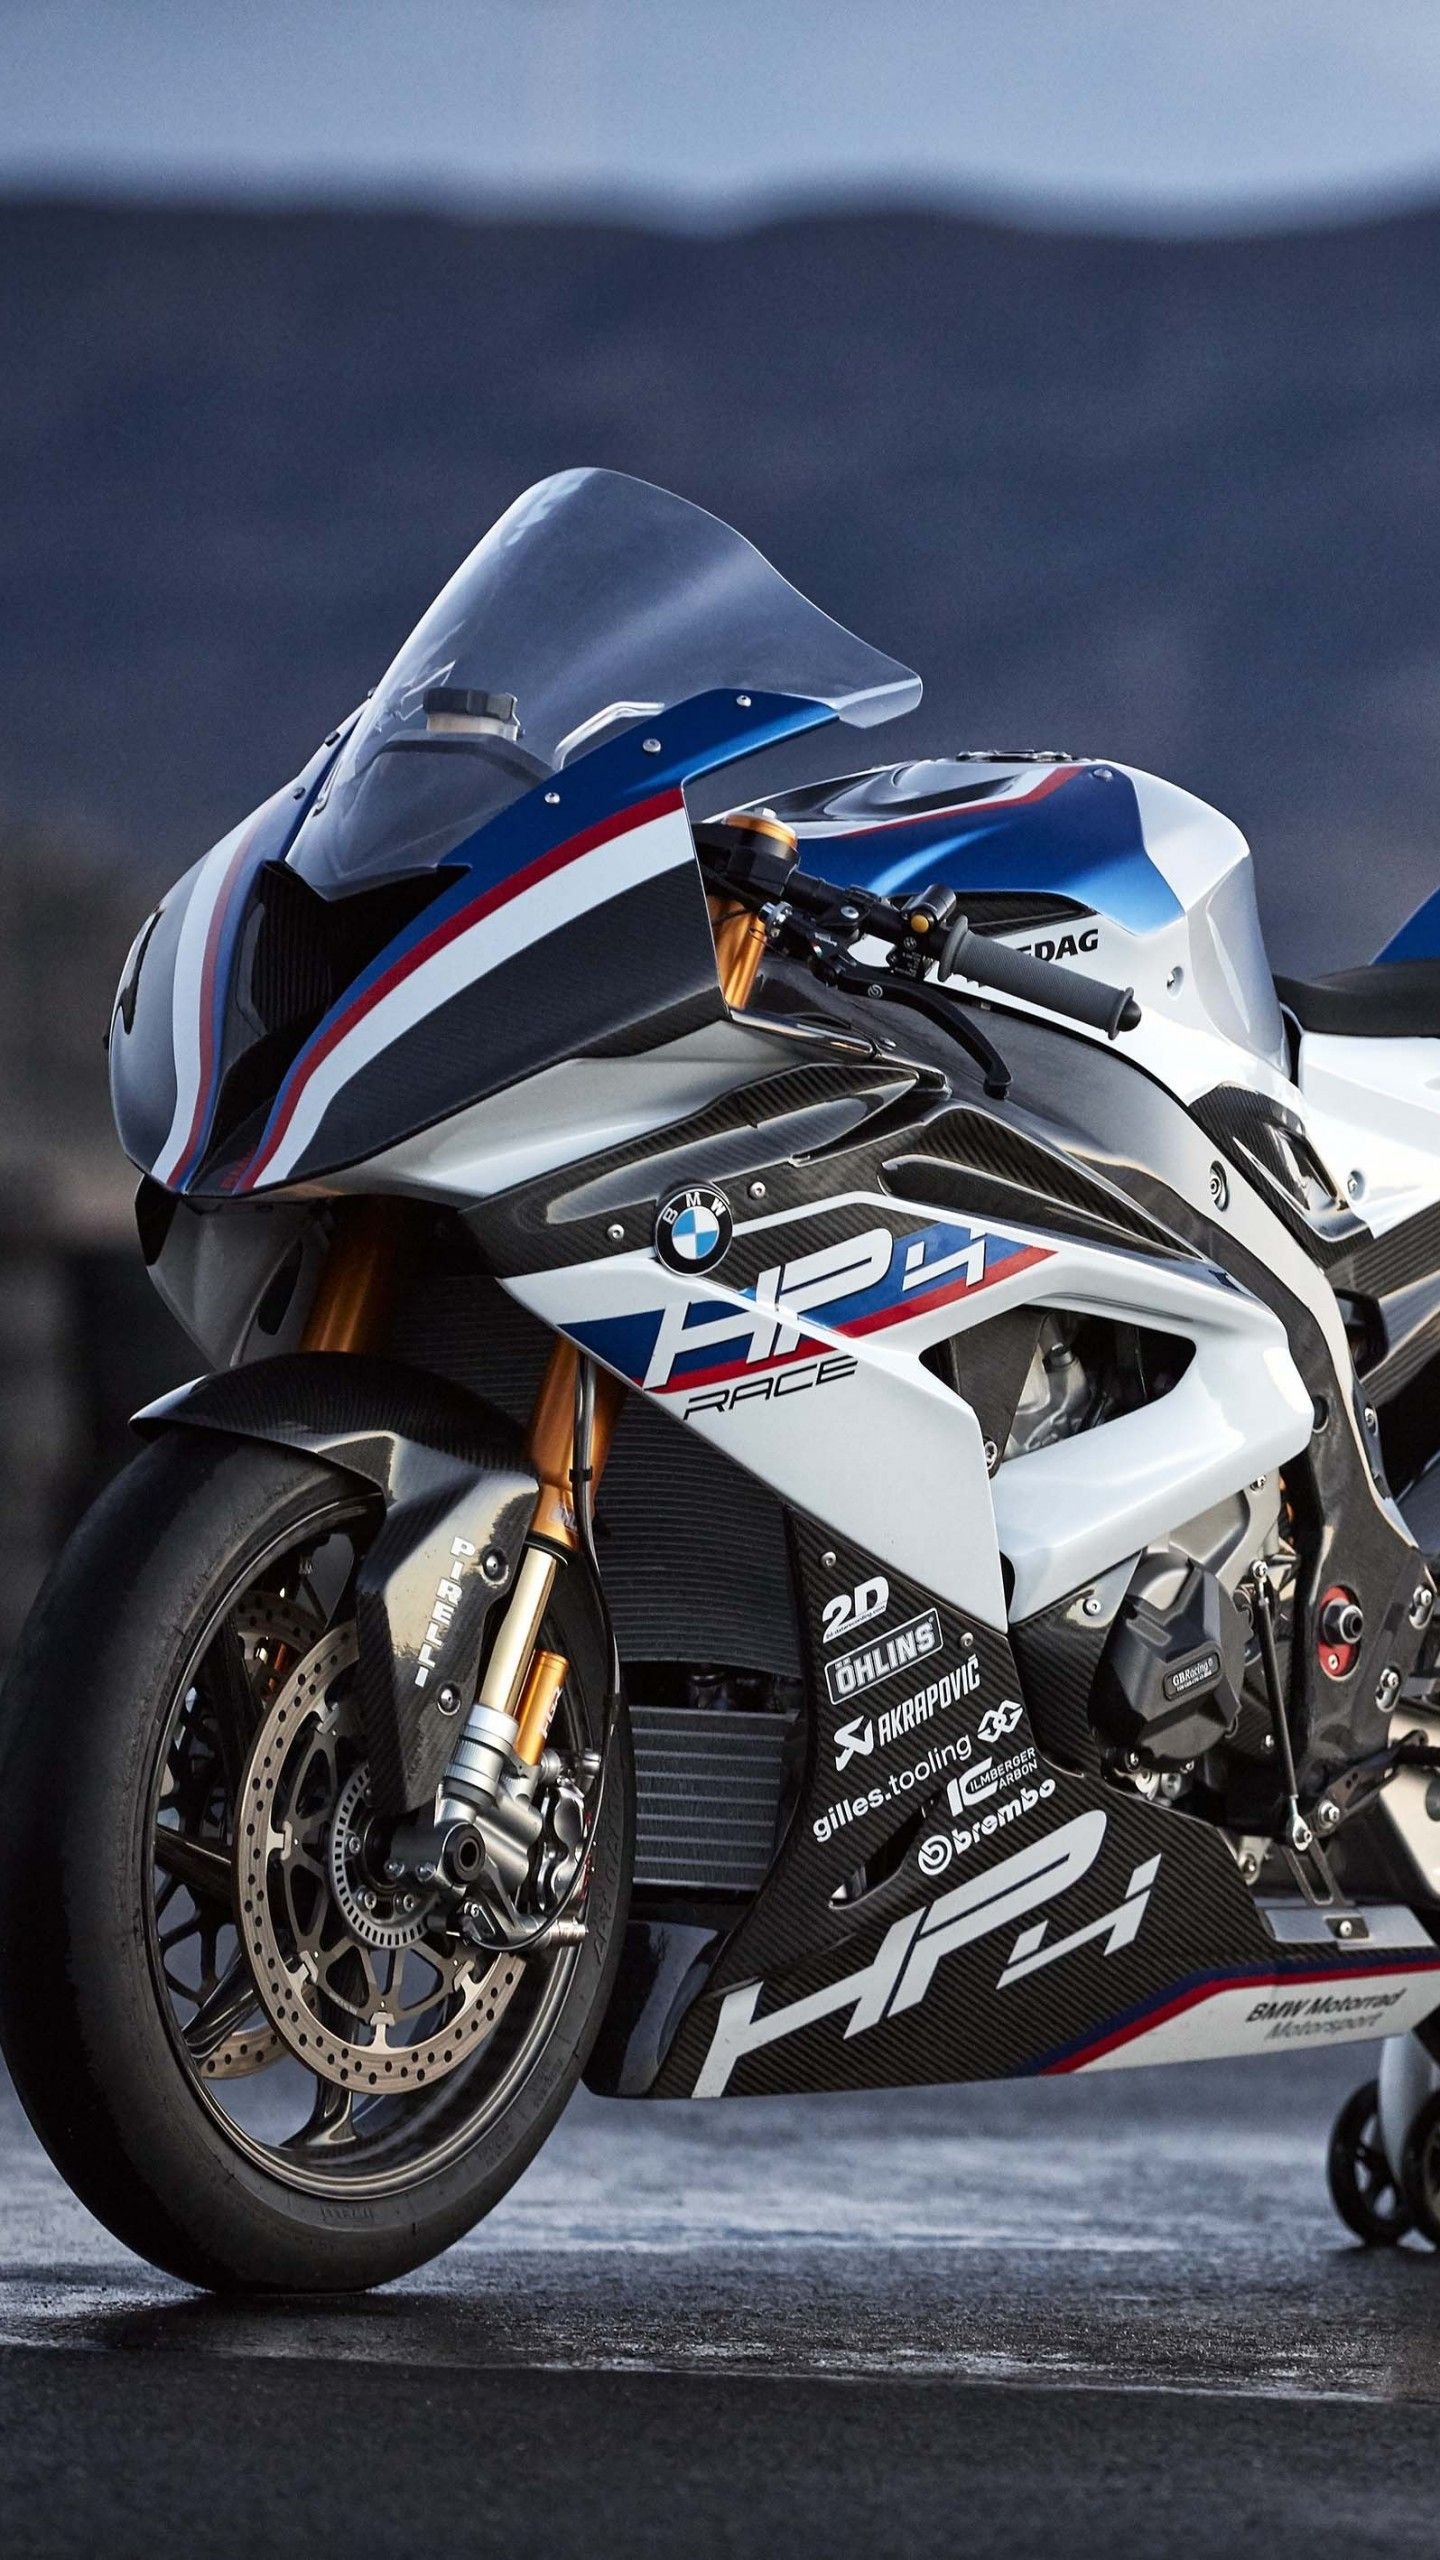 Bmw s 1000 rr bike Wallpapers Download | MobCup